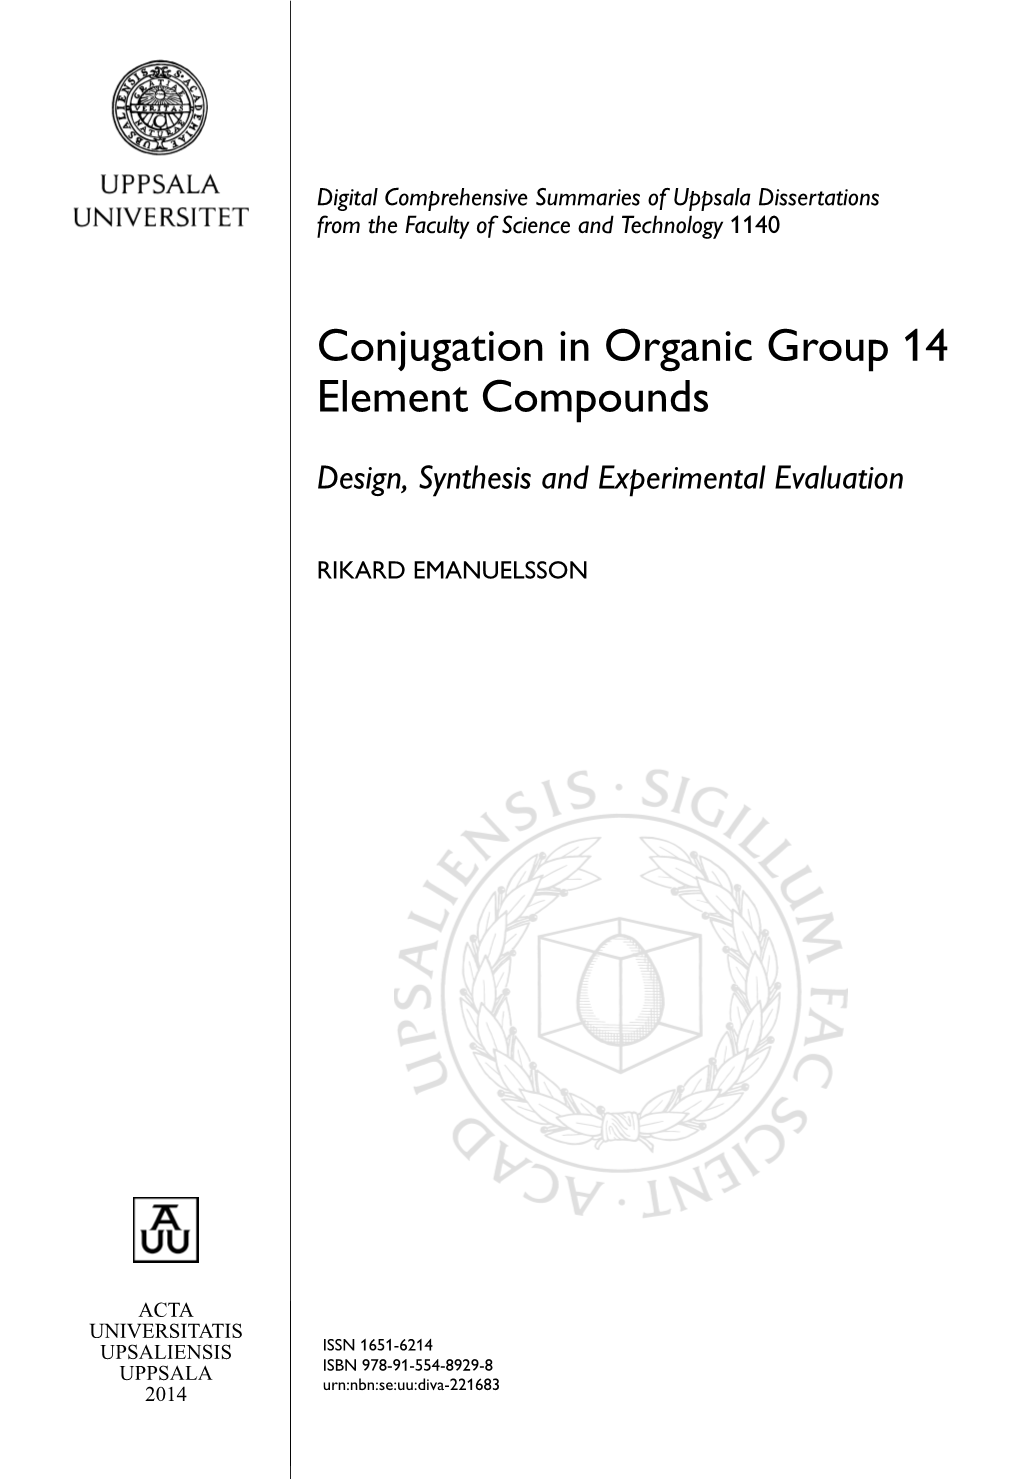 Conjugation in Organic Group 14 Element Compounds